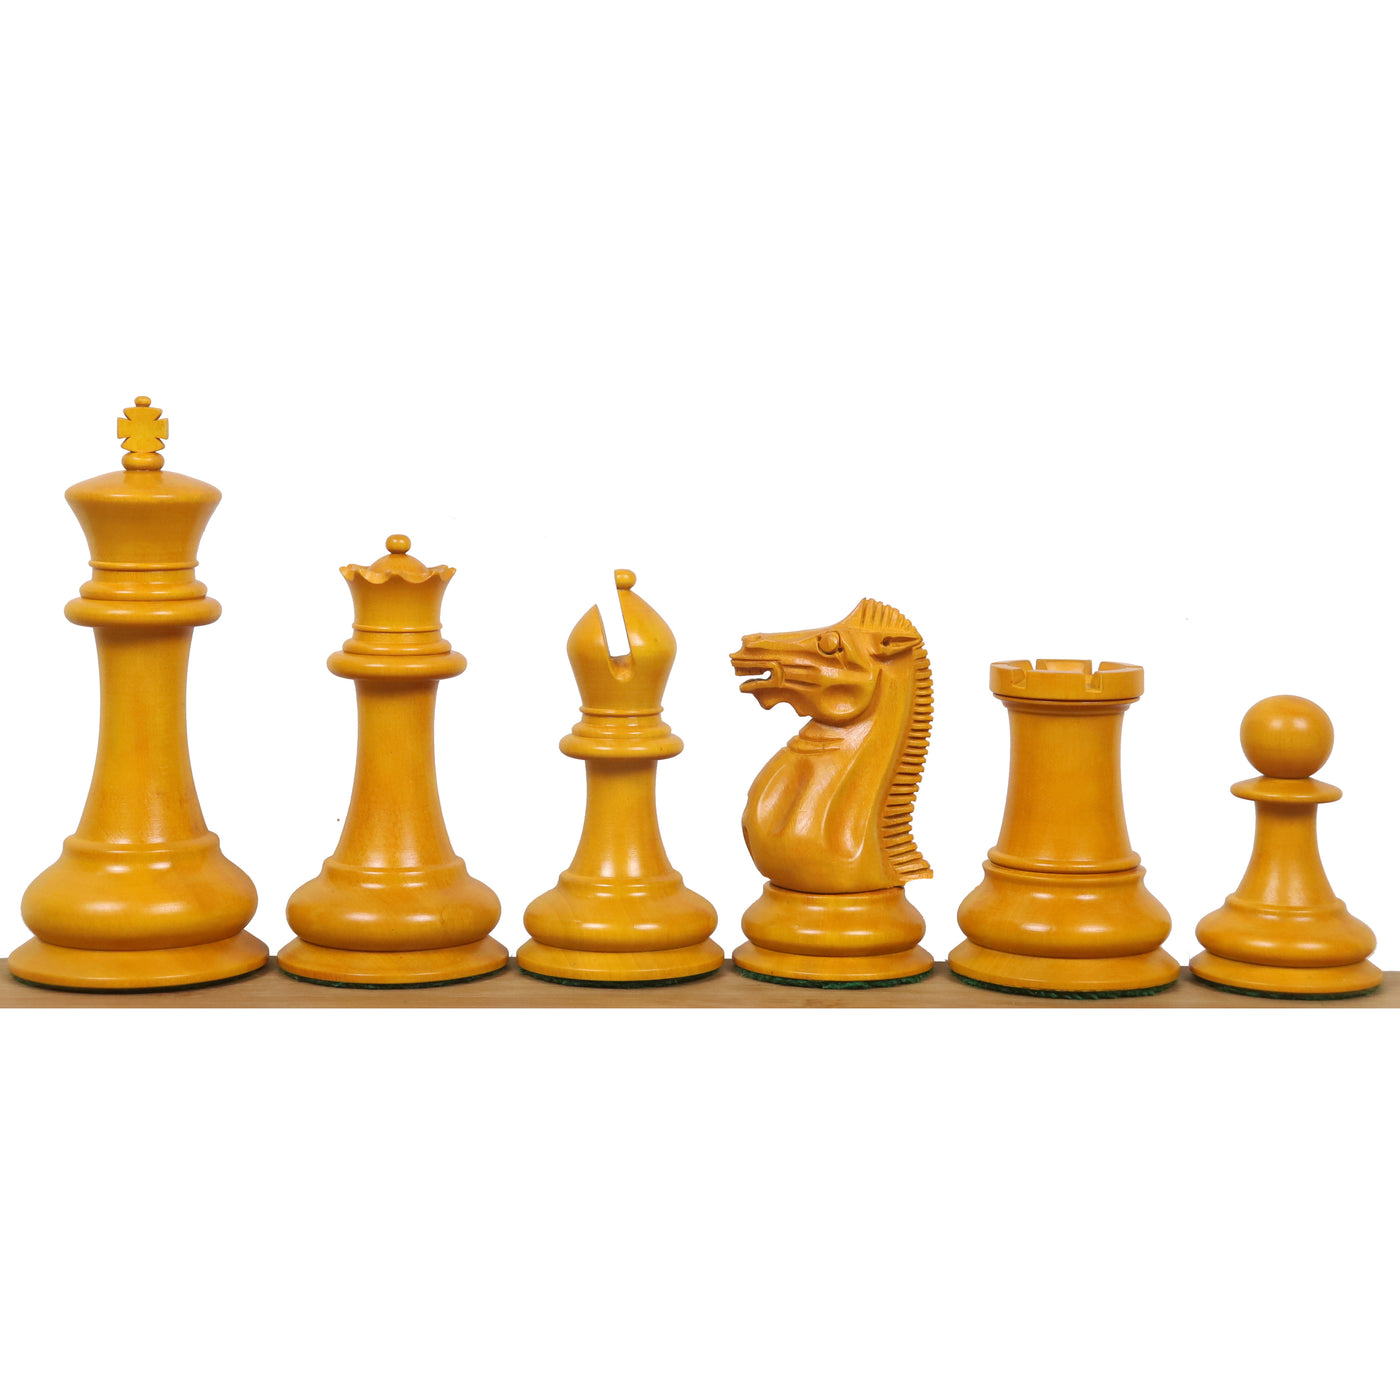 Reproduced 1849 Staunton Chess Pieces Only set